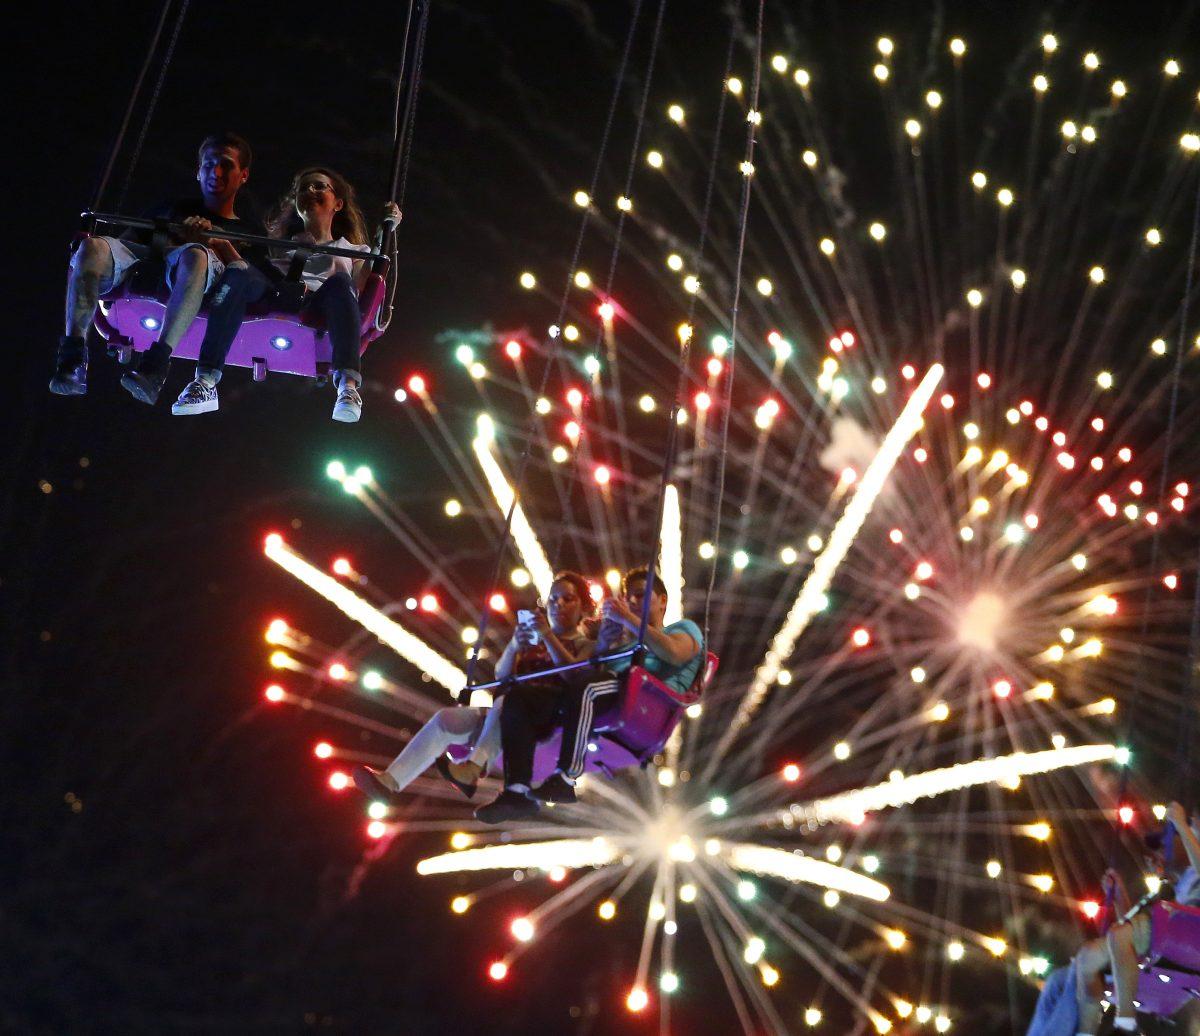 People ride the Sky Flyer at State Fair Meadowlands carnival as fireworks explode, in East Rutherford, N.J., on July 3, 2013. (Julio Cortez/AP Photo)